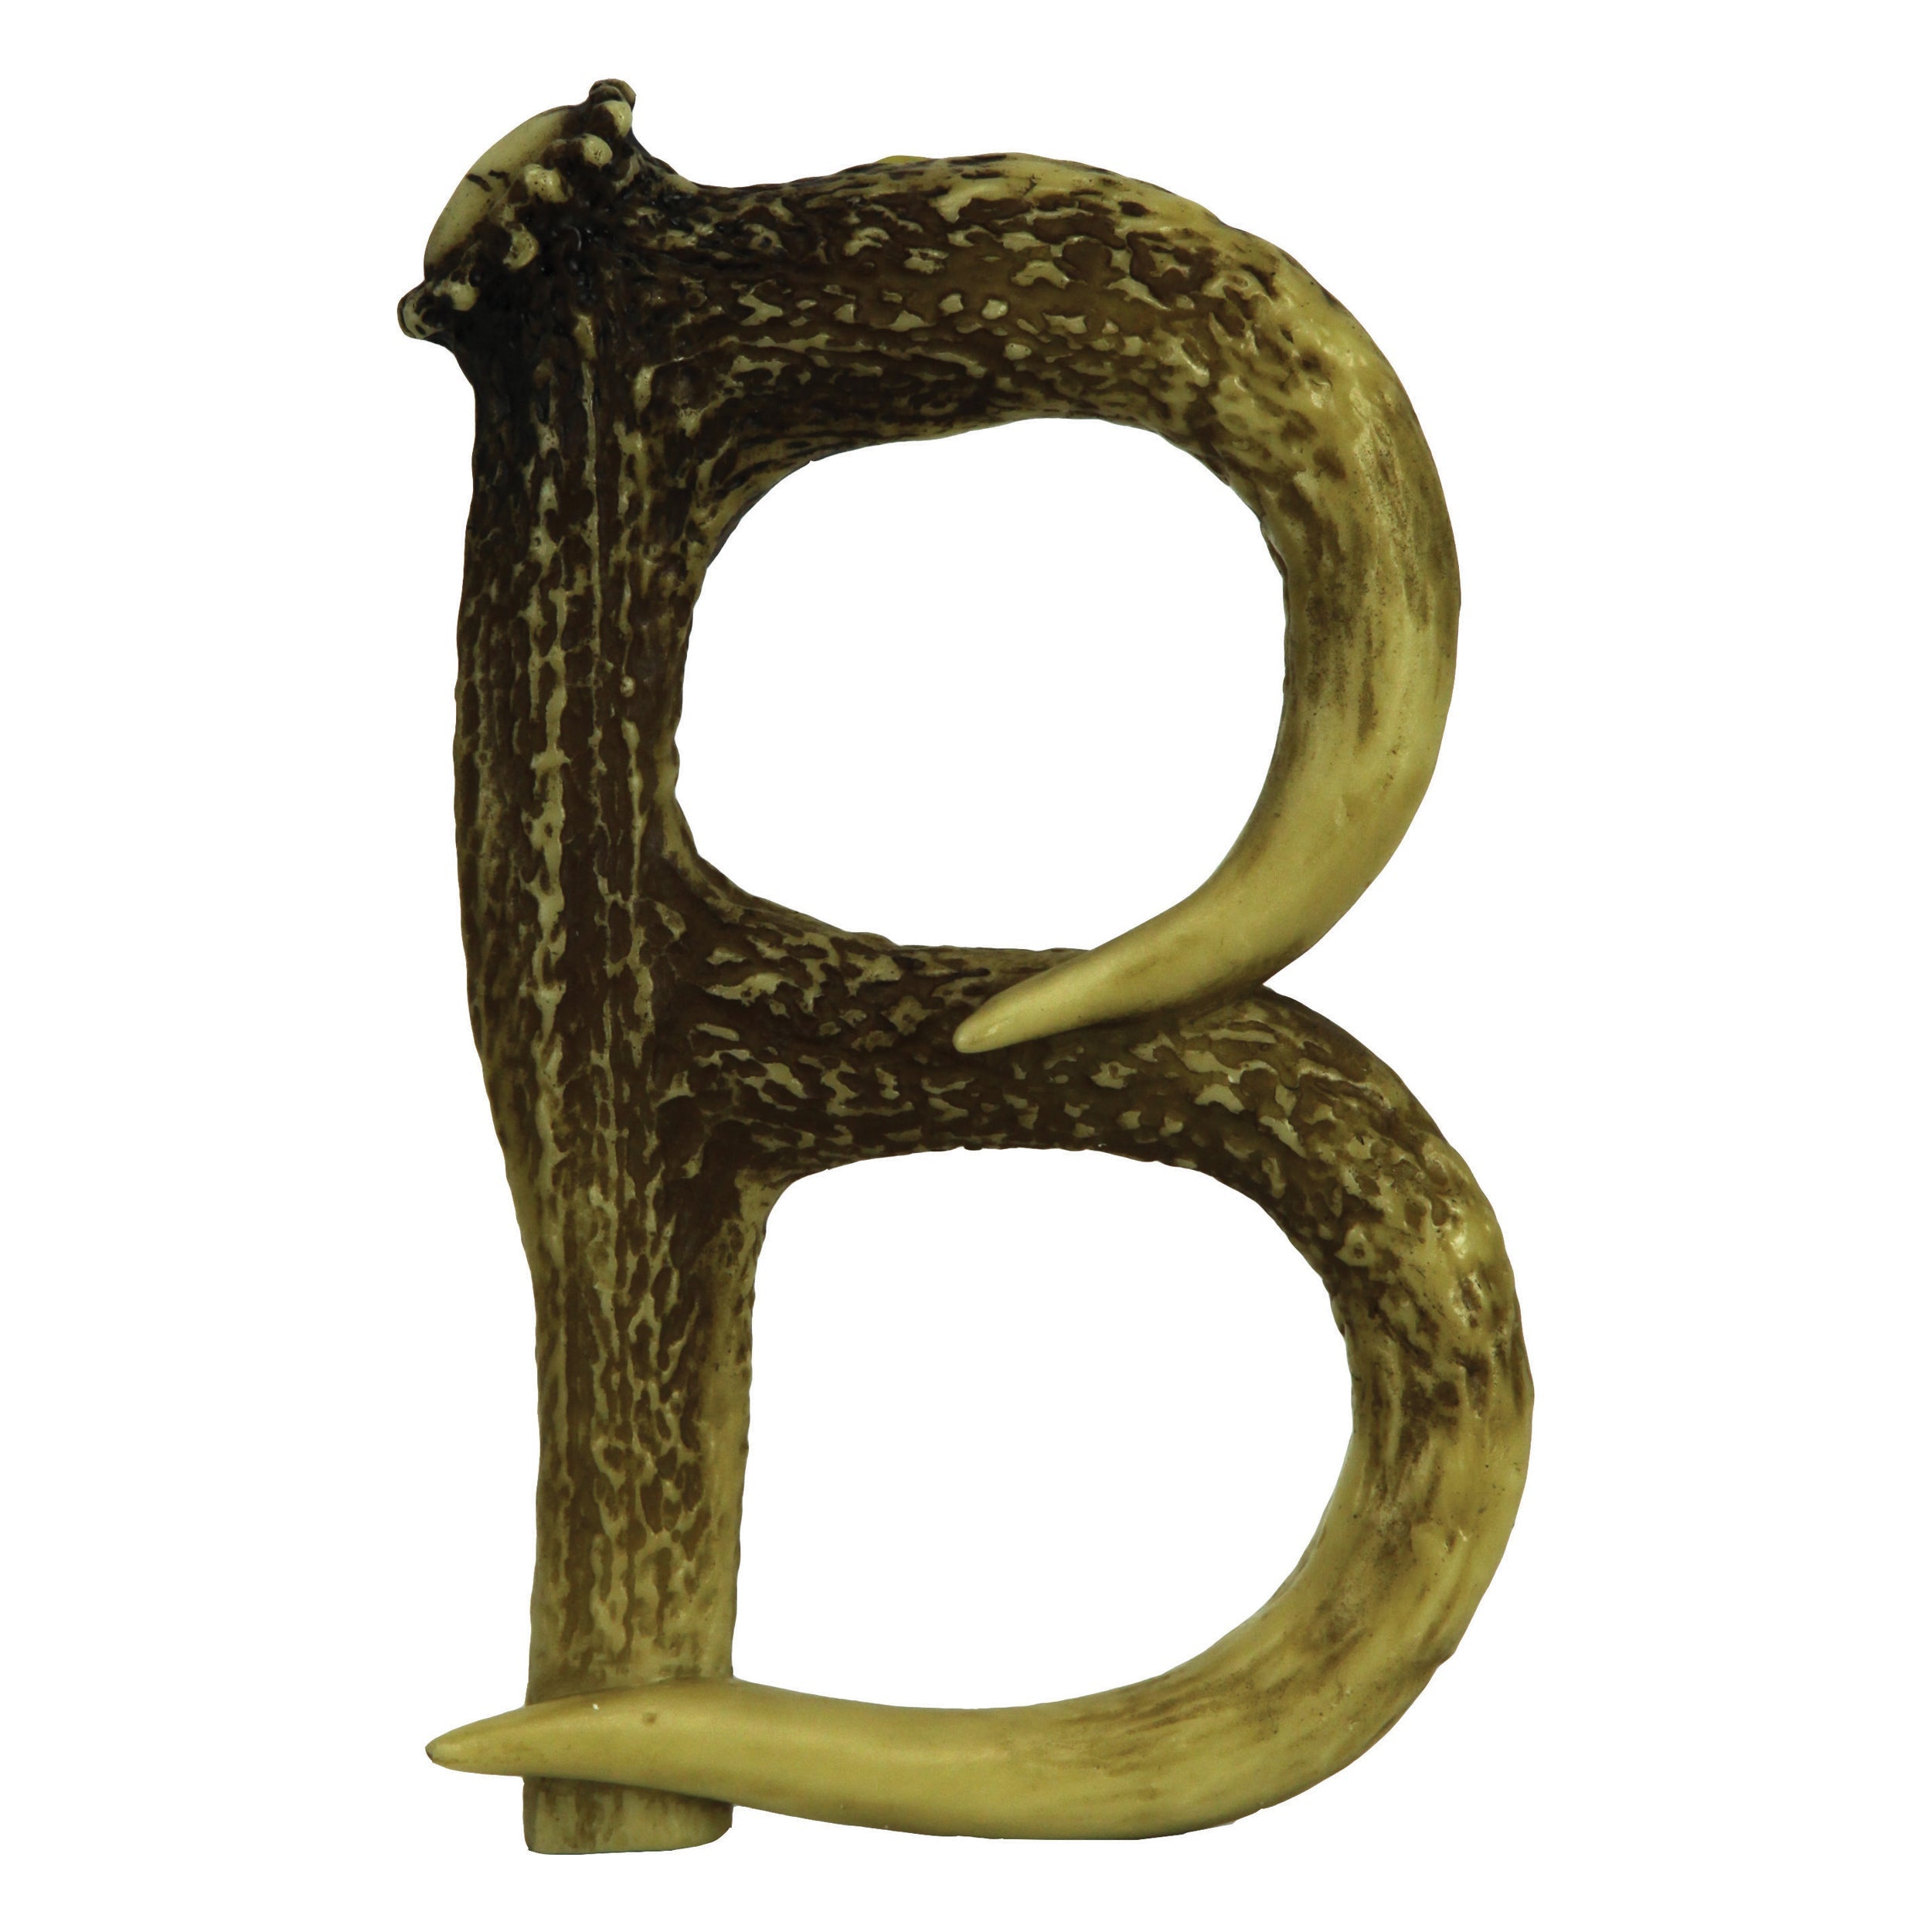 csw antler letters